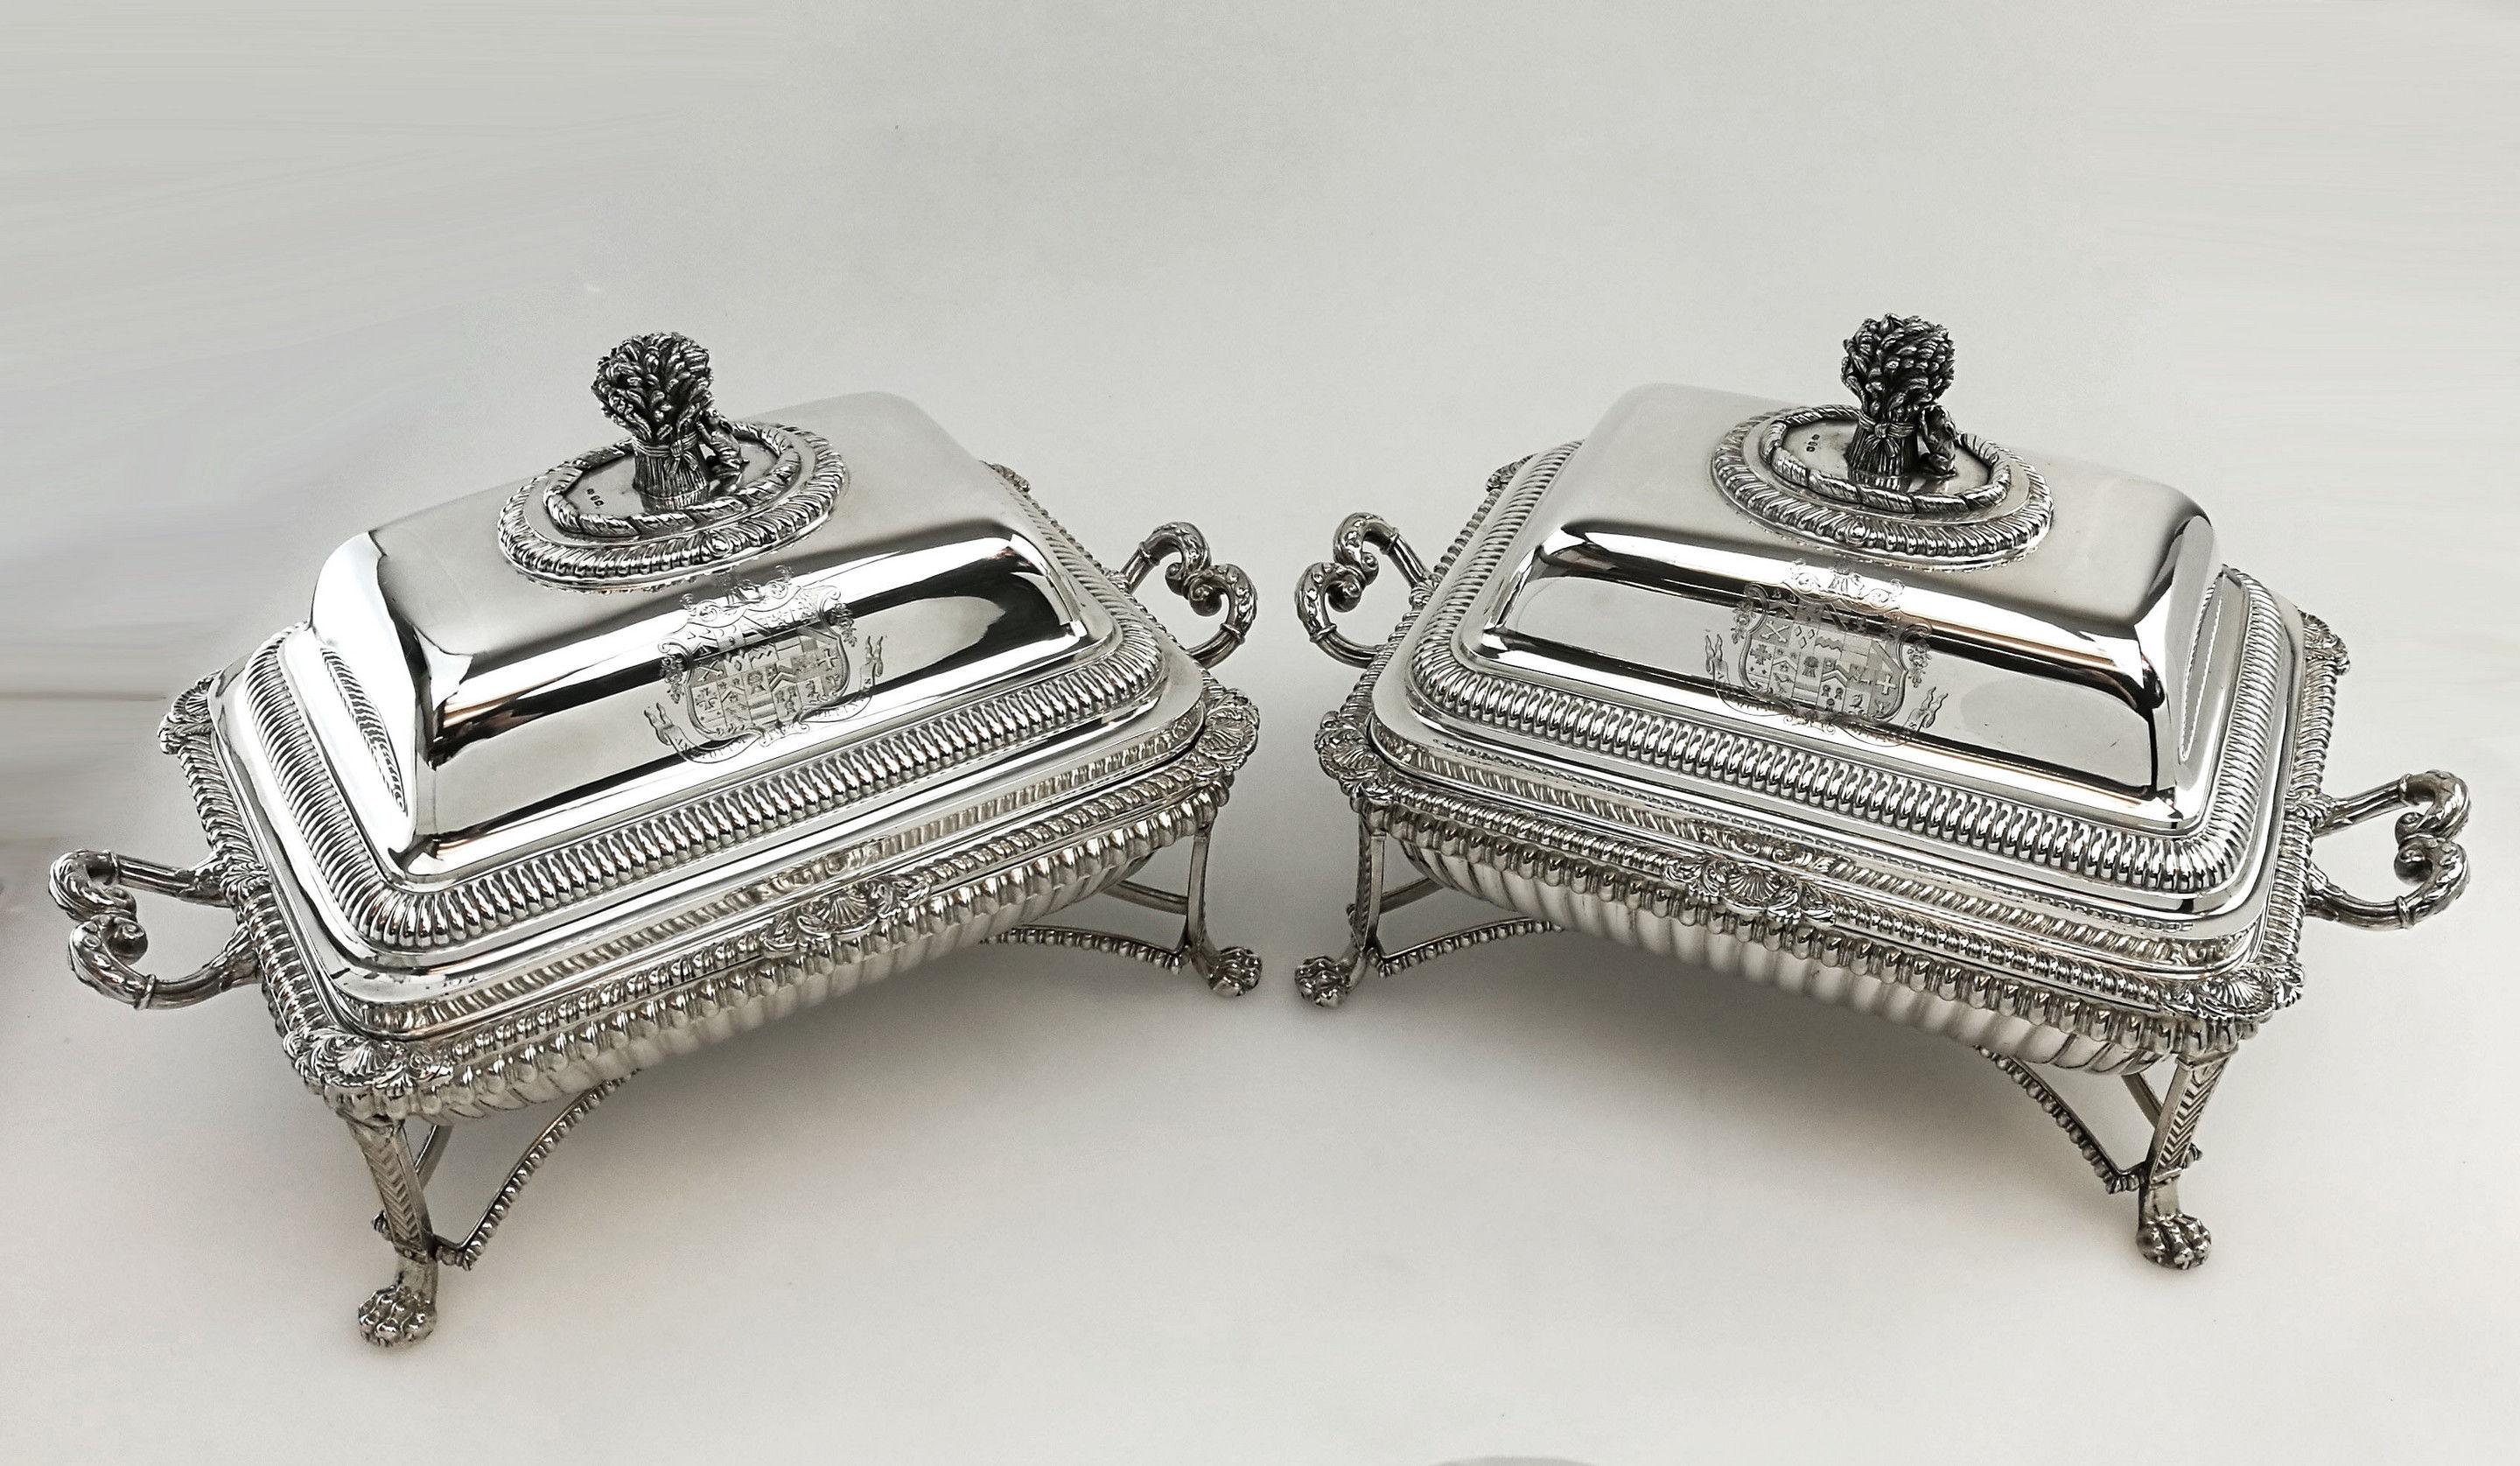 A spectacular pair of antique George III Paul Storr solid silver entree dishes on separate Sheffield plate warming stands. The sterling silver entree dishes feature a base with an impressive shell and gadroon border and a fitted lid with a tall